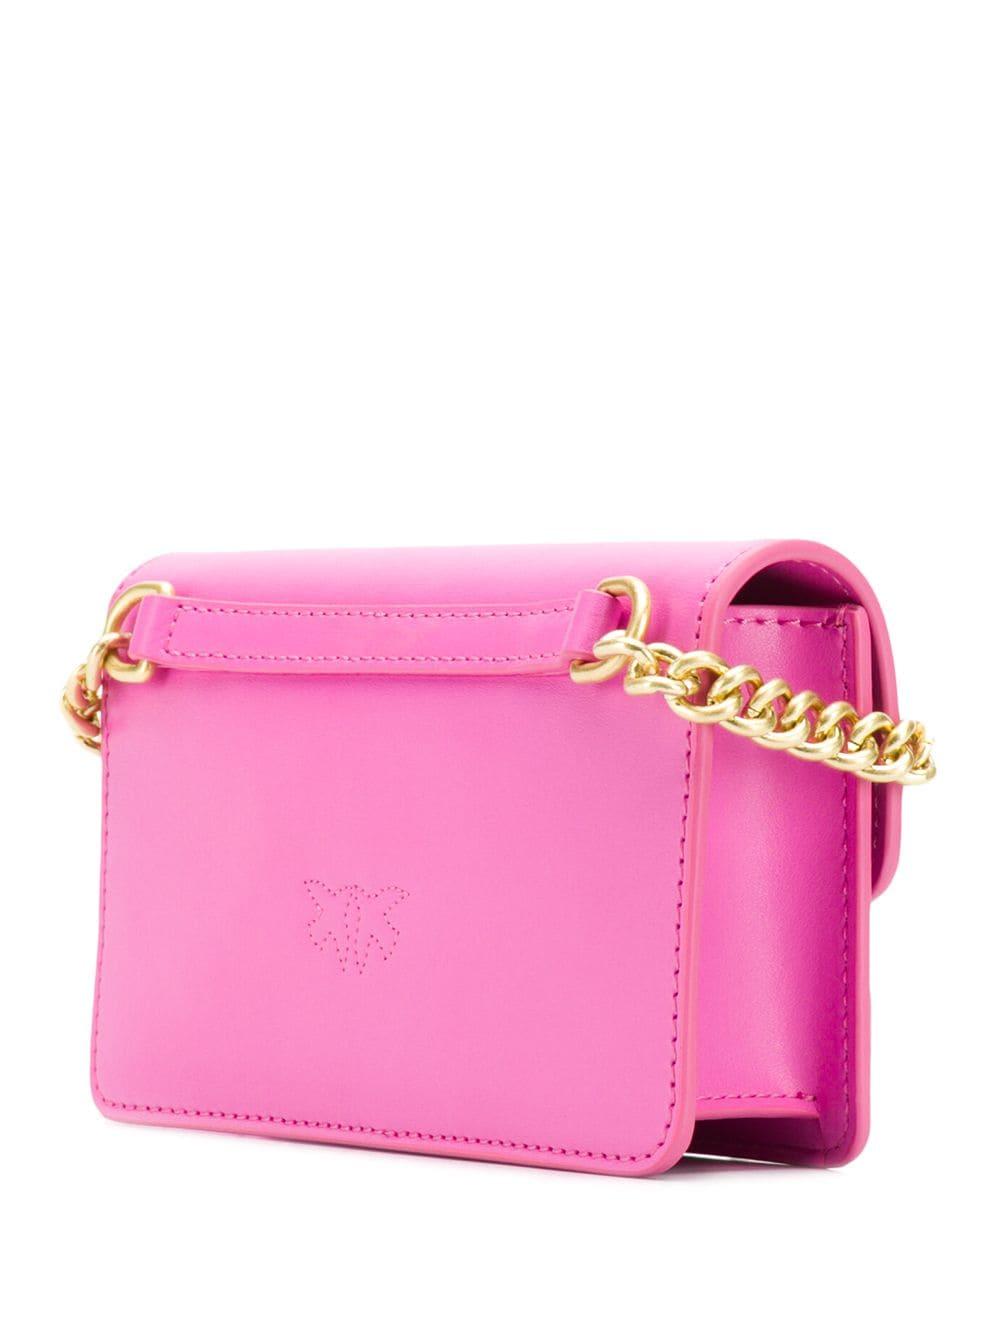 Pinko Leather Baby Love Simply Cross Body Bag in Pink - Lyst